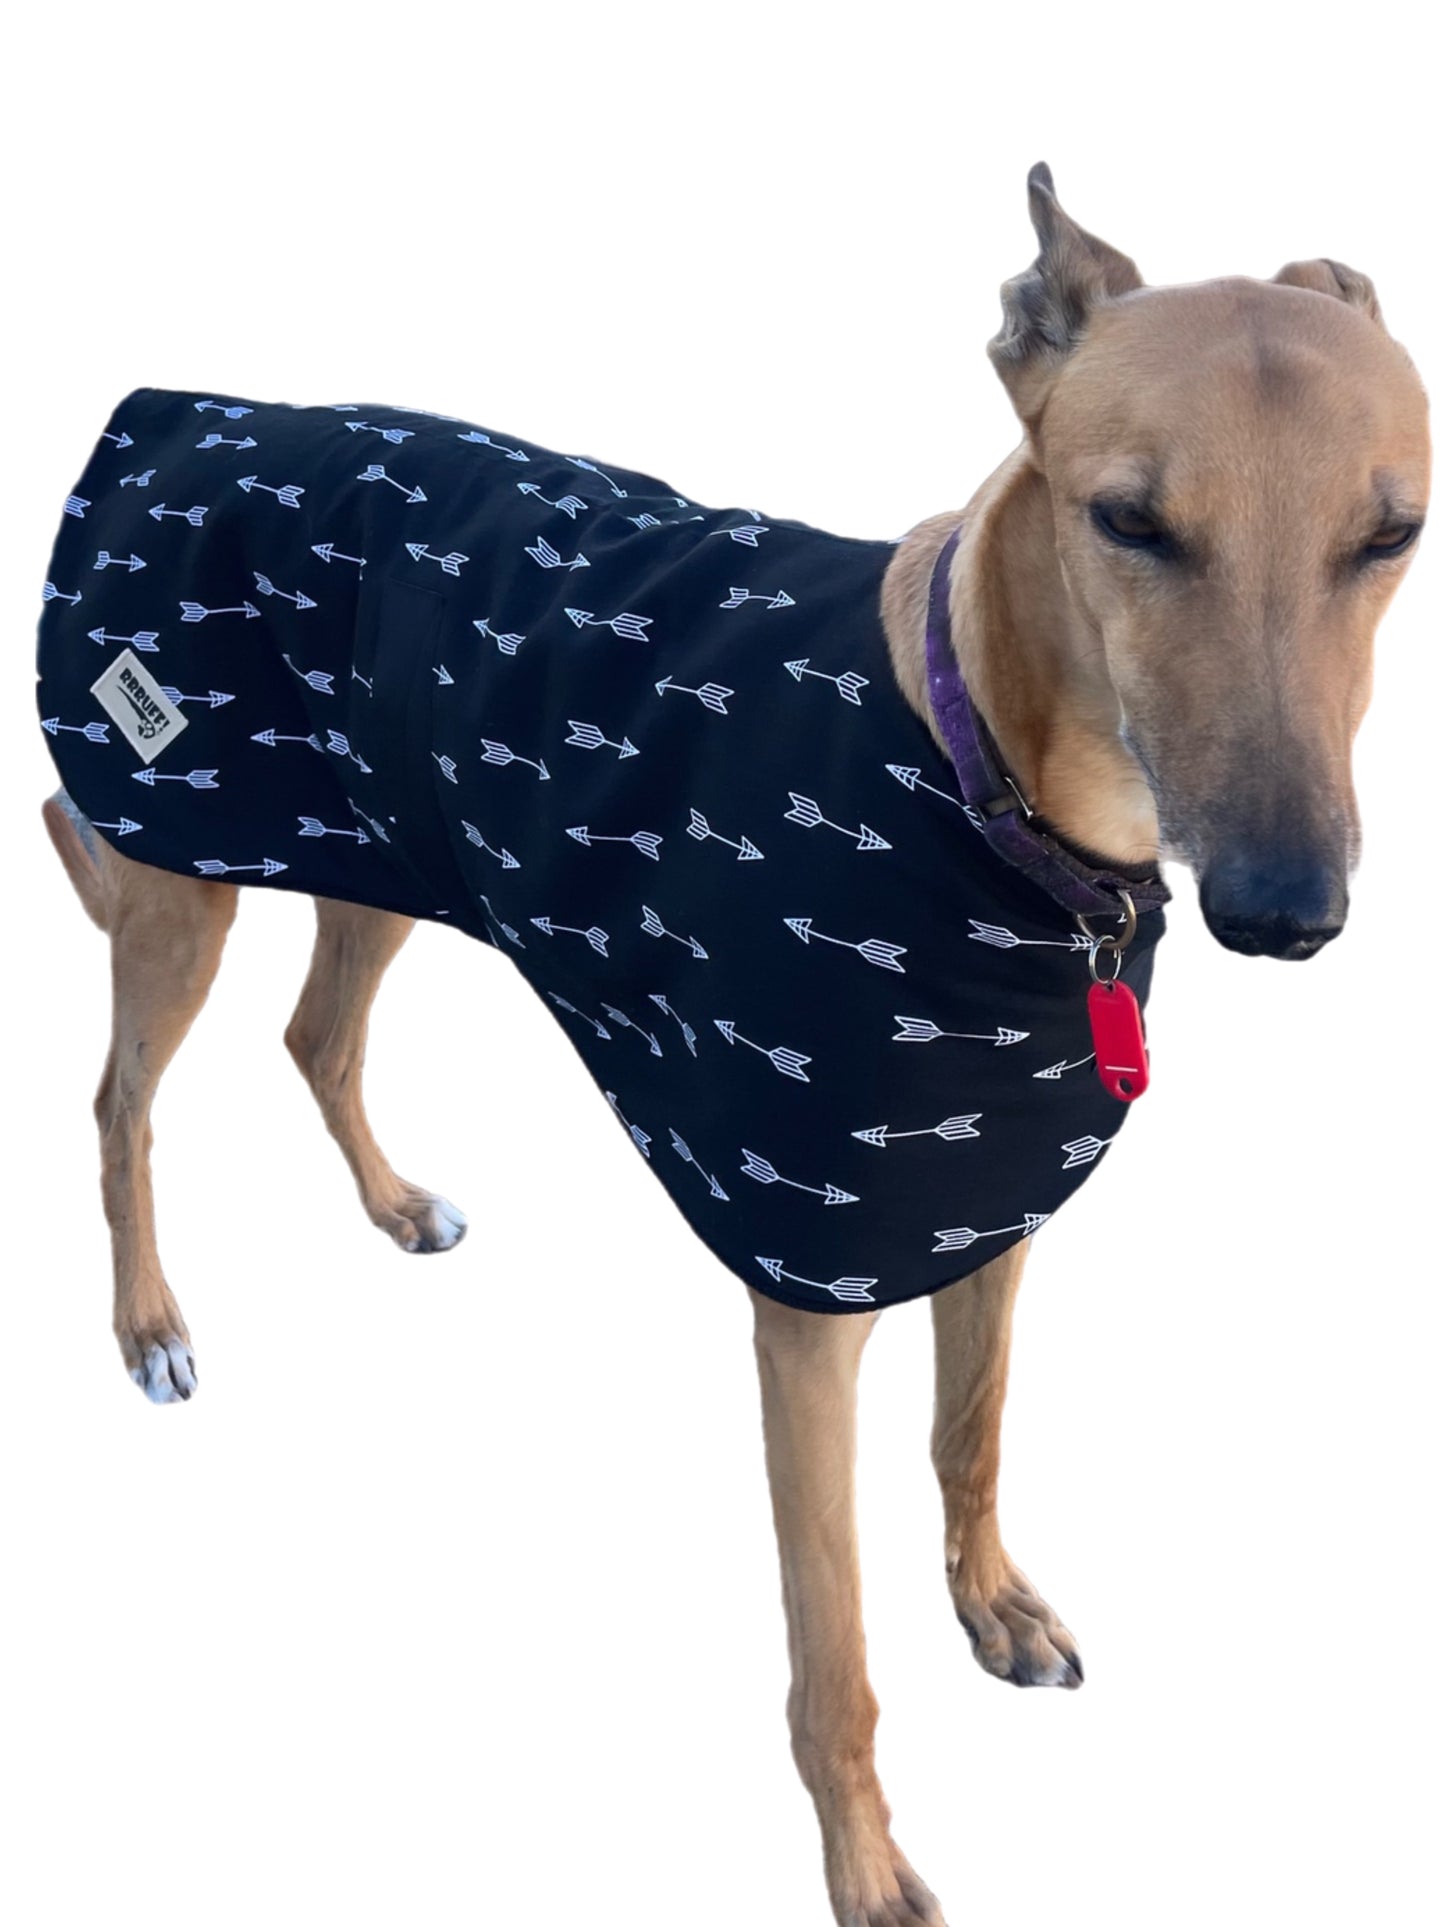 Spring classic style Greyhound coat design in a soft black and white cotton & lush fleece washable